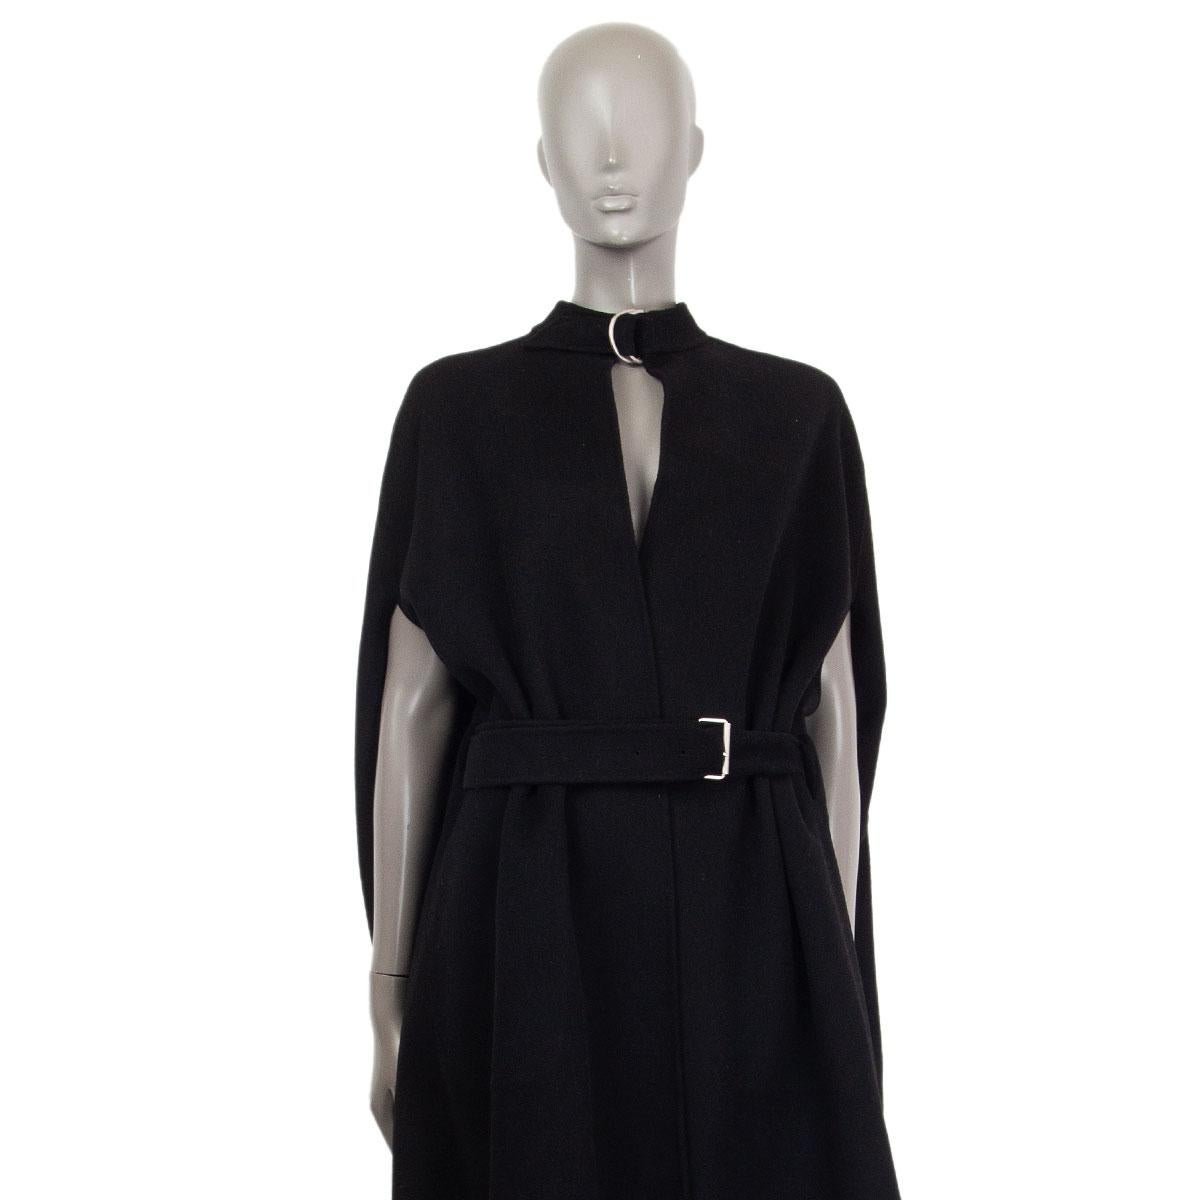 authentic Christian Dior belted cape in black cashmere blend (missing tag). Unlined with two inside pockets and a buttoned pleat on the back. Has been worn and is in excellent condition. 

Tag Size OS
Size one size
Length 119cm (46.4in)
